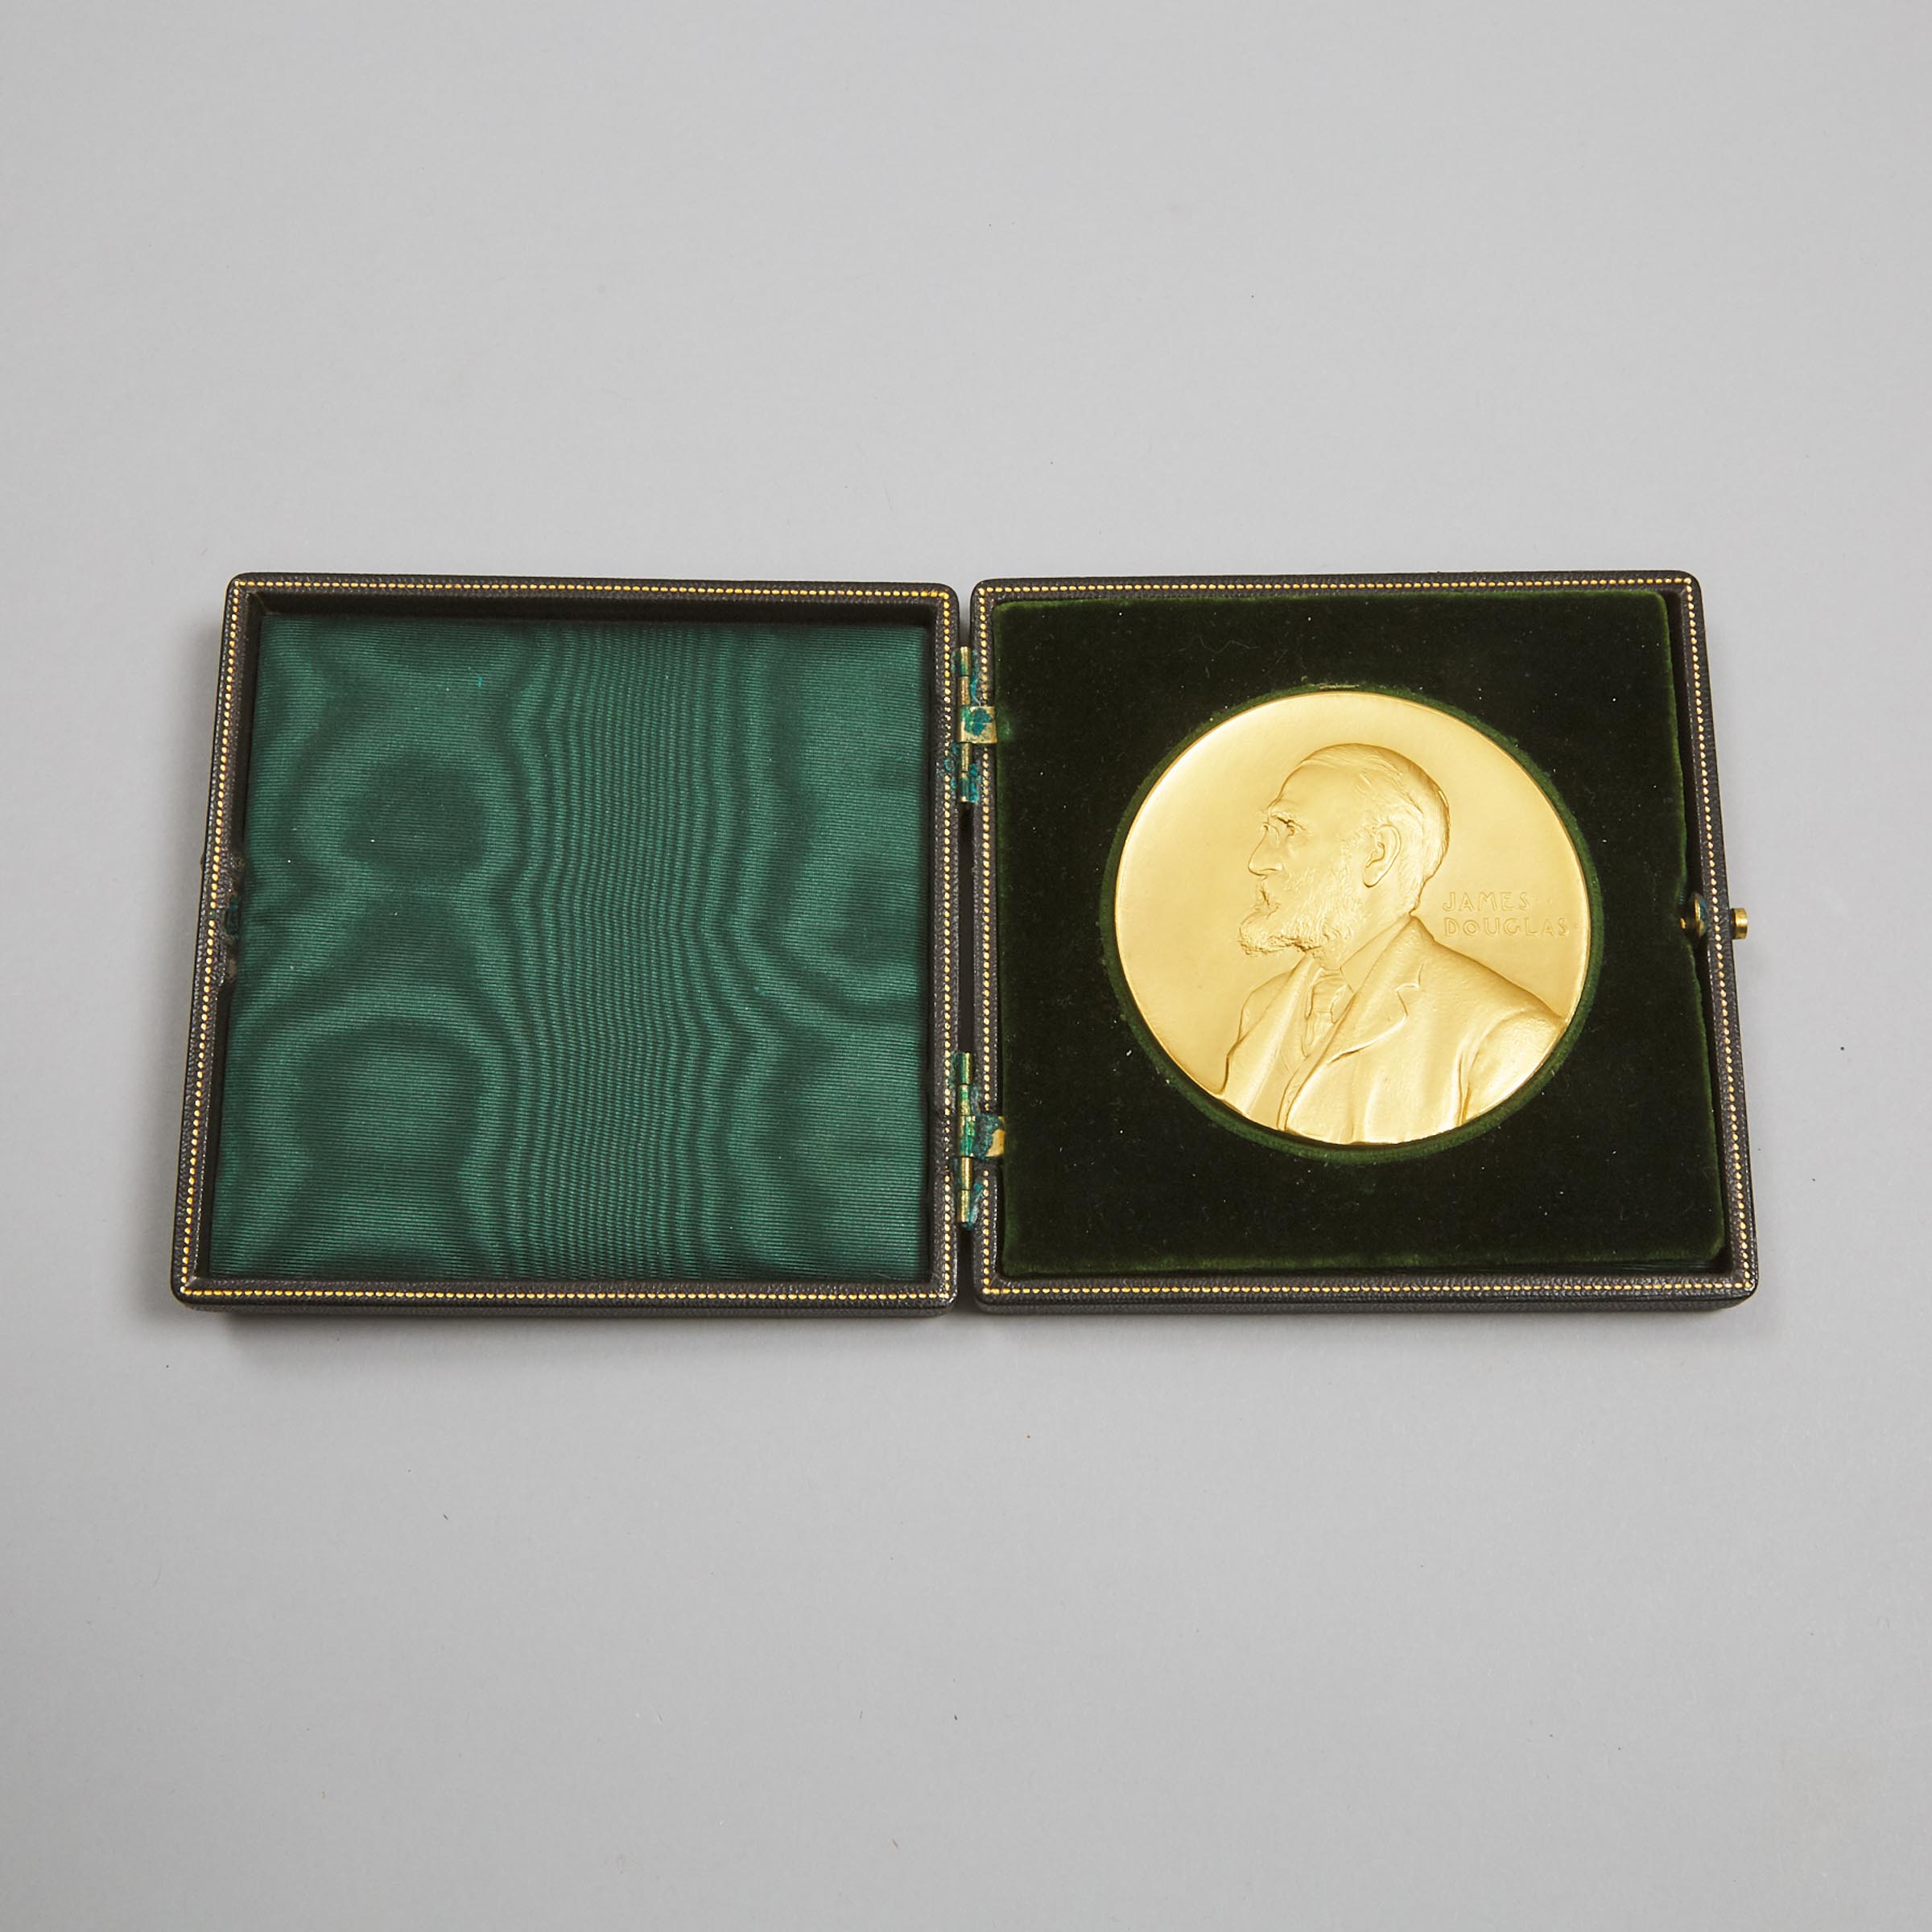 Gold Medal to Selwyn Gwillym Blaylock: James Douglas Award for Achievement in Non-Ferrous Metallurgy, 1928